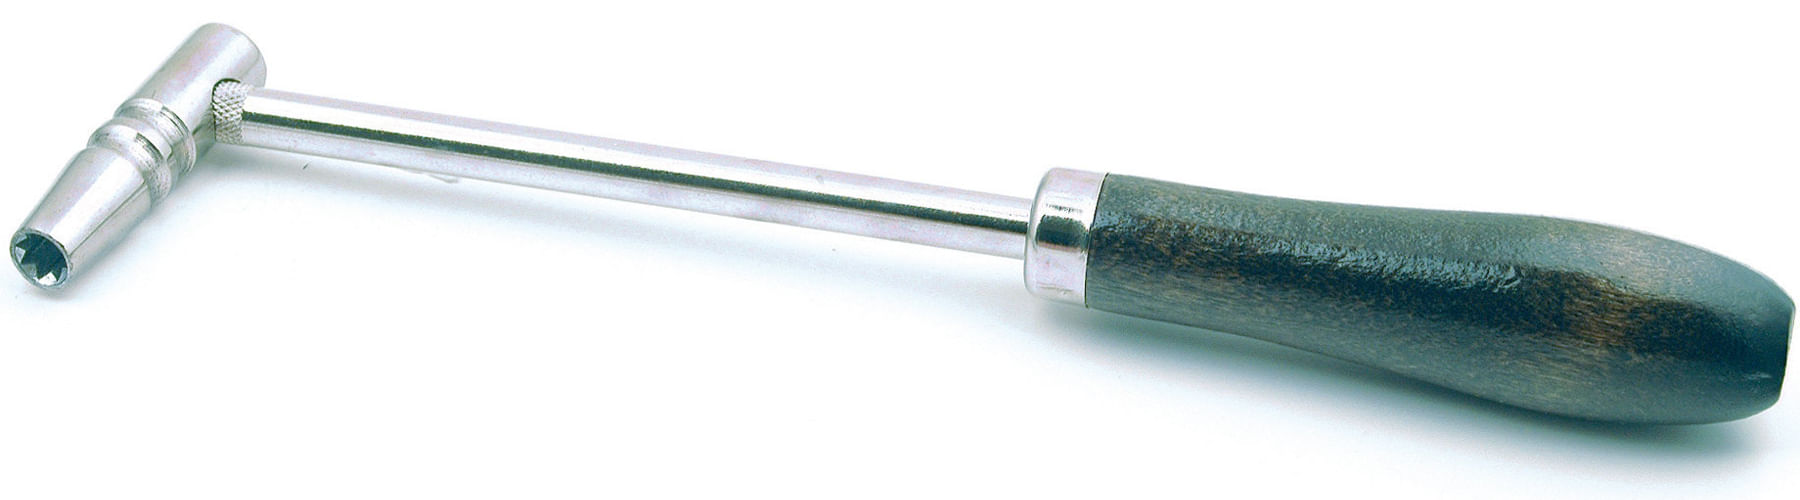 Trophy Piano Tuning Hammer with Star Head